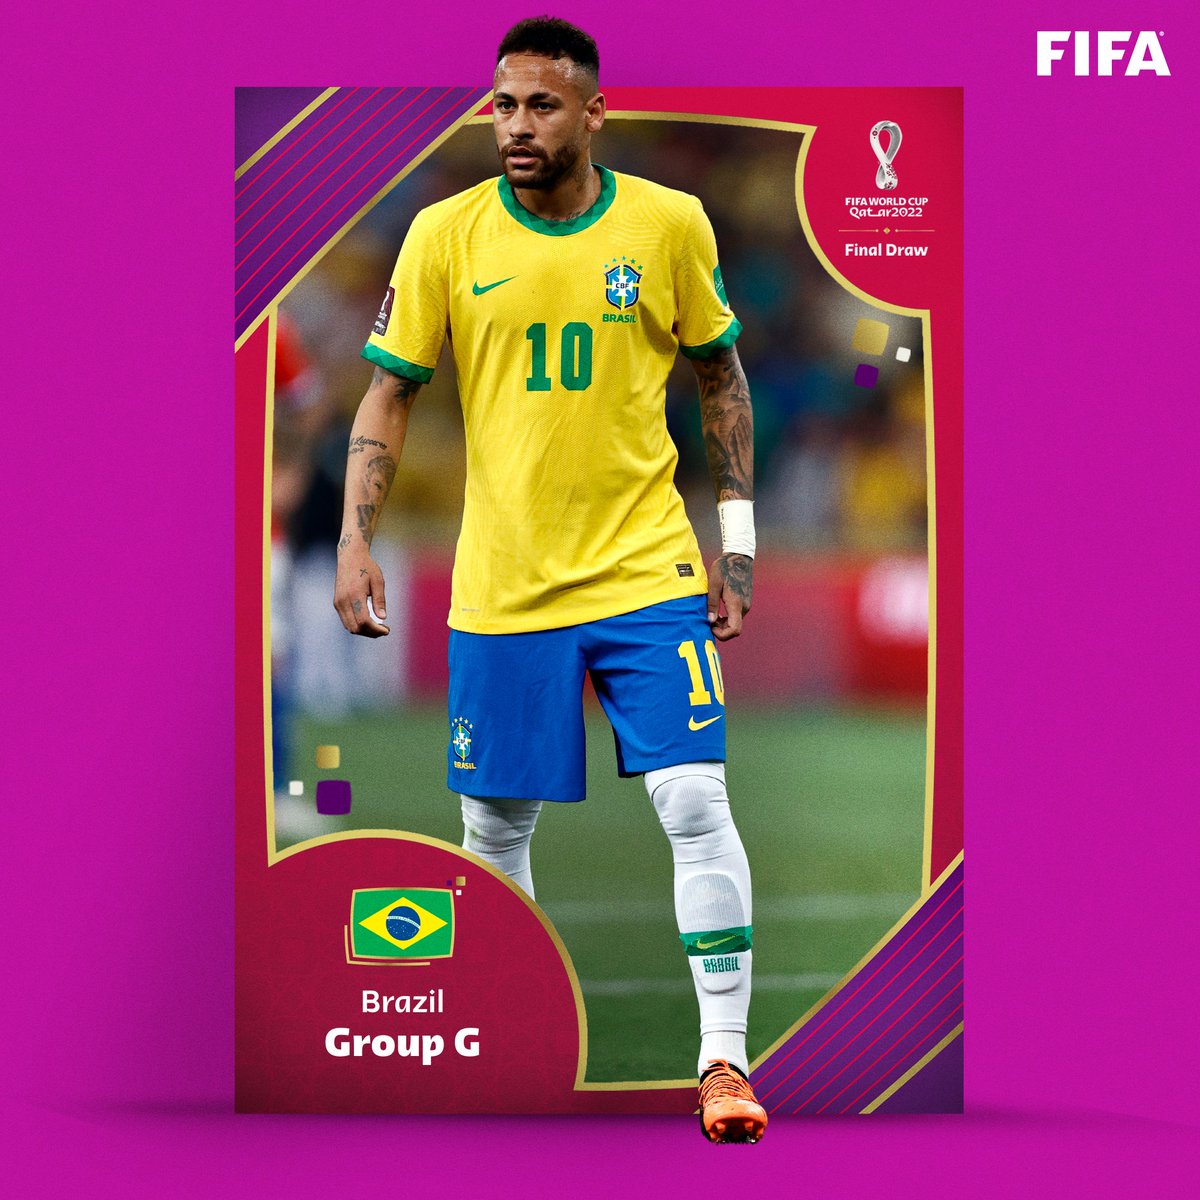 FIFA World Cup on X: 🇧🇷 Brazil are drawn first in Group G! They have  been drawn in spot G1 📈 𝙁𝙄𝙁𝘼 𝙍𝙖𝙣𝙠𝙞𝙣𝙜: 1 🏆 𝘽𝙚𝙨𝙩  𝙛𝙞𝙣𝙞𝙨𝙝: Winners (1958, 1962, 1970, 1994